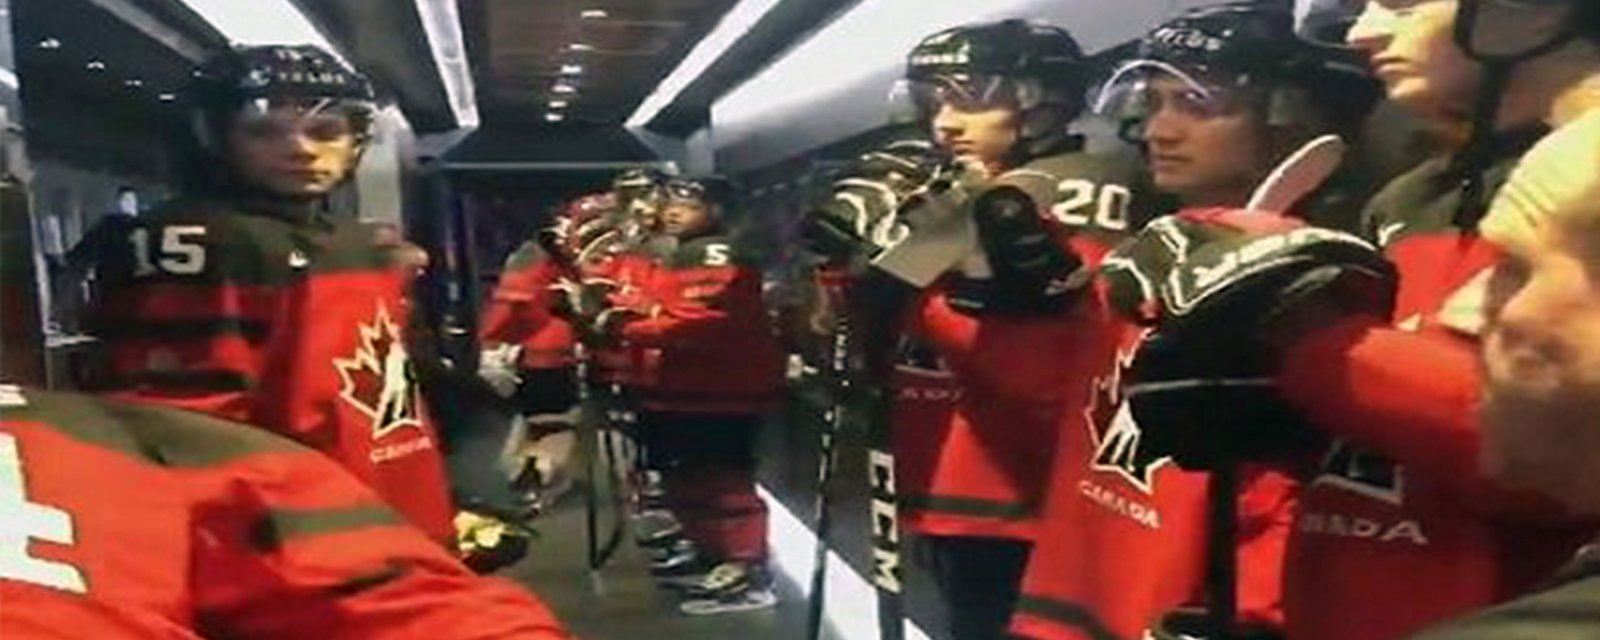 Canadian captain Max Comtois channels Bruce Buffer to pump up the boys before 14-0 rout